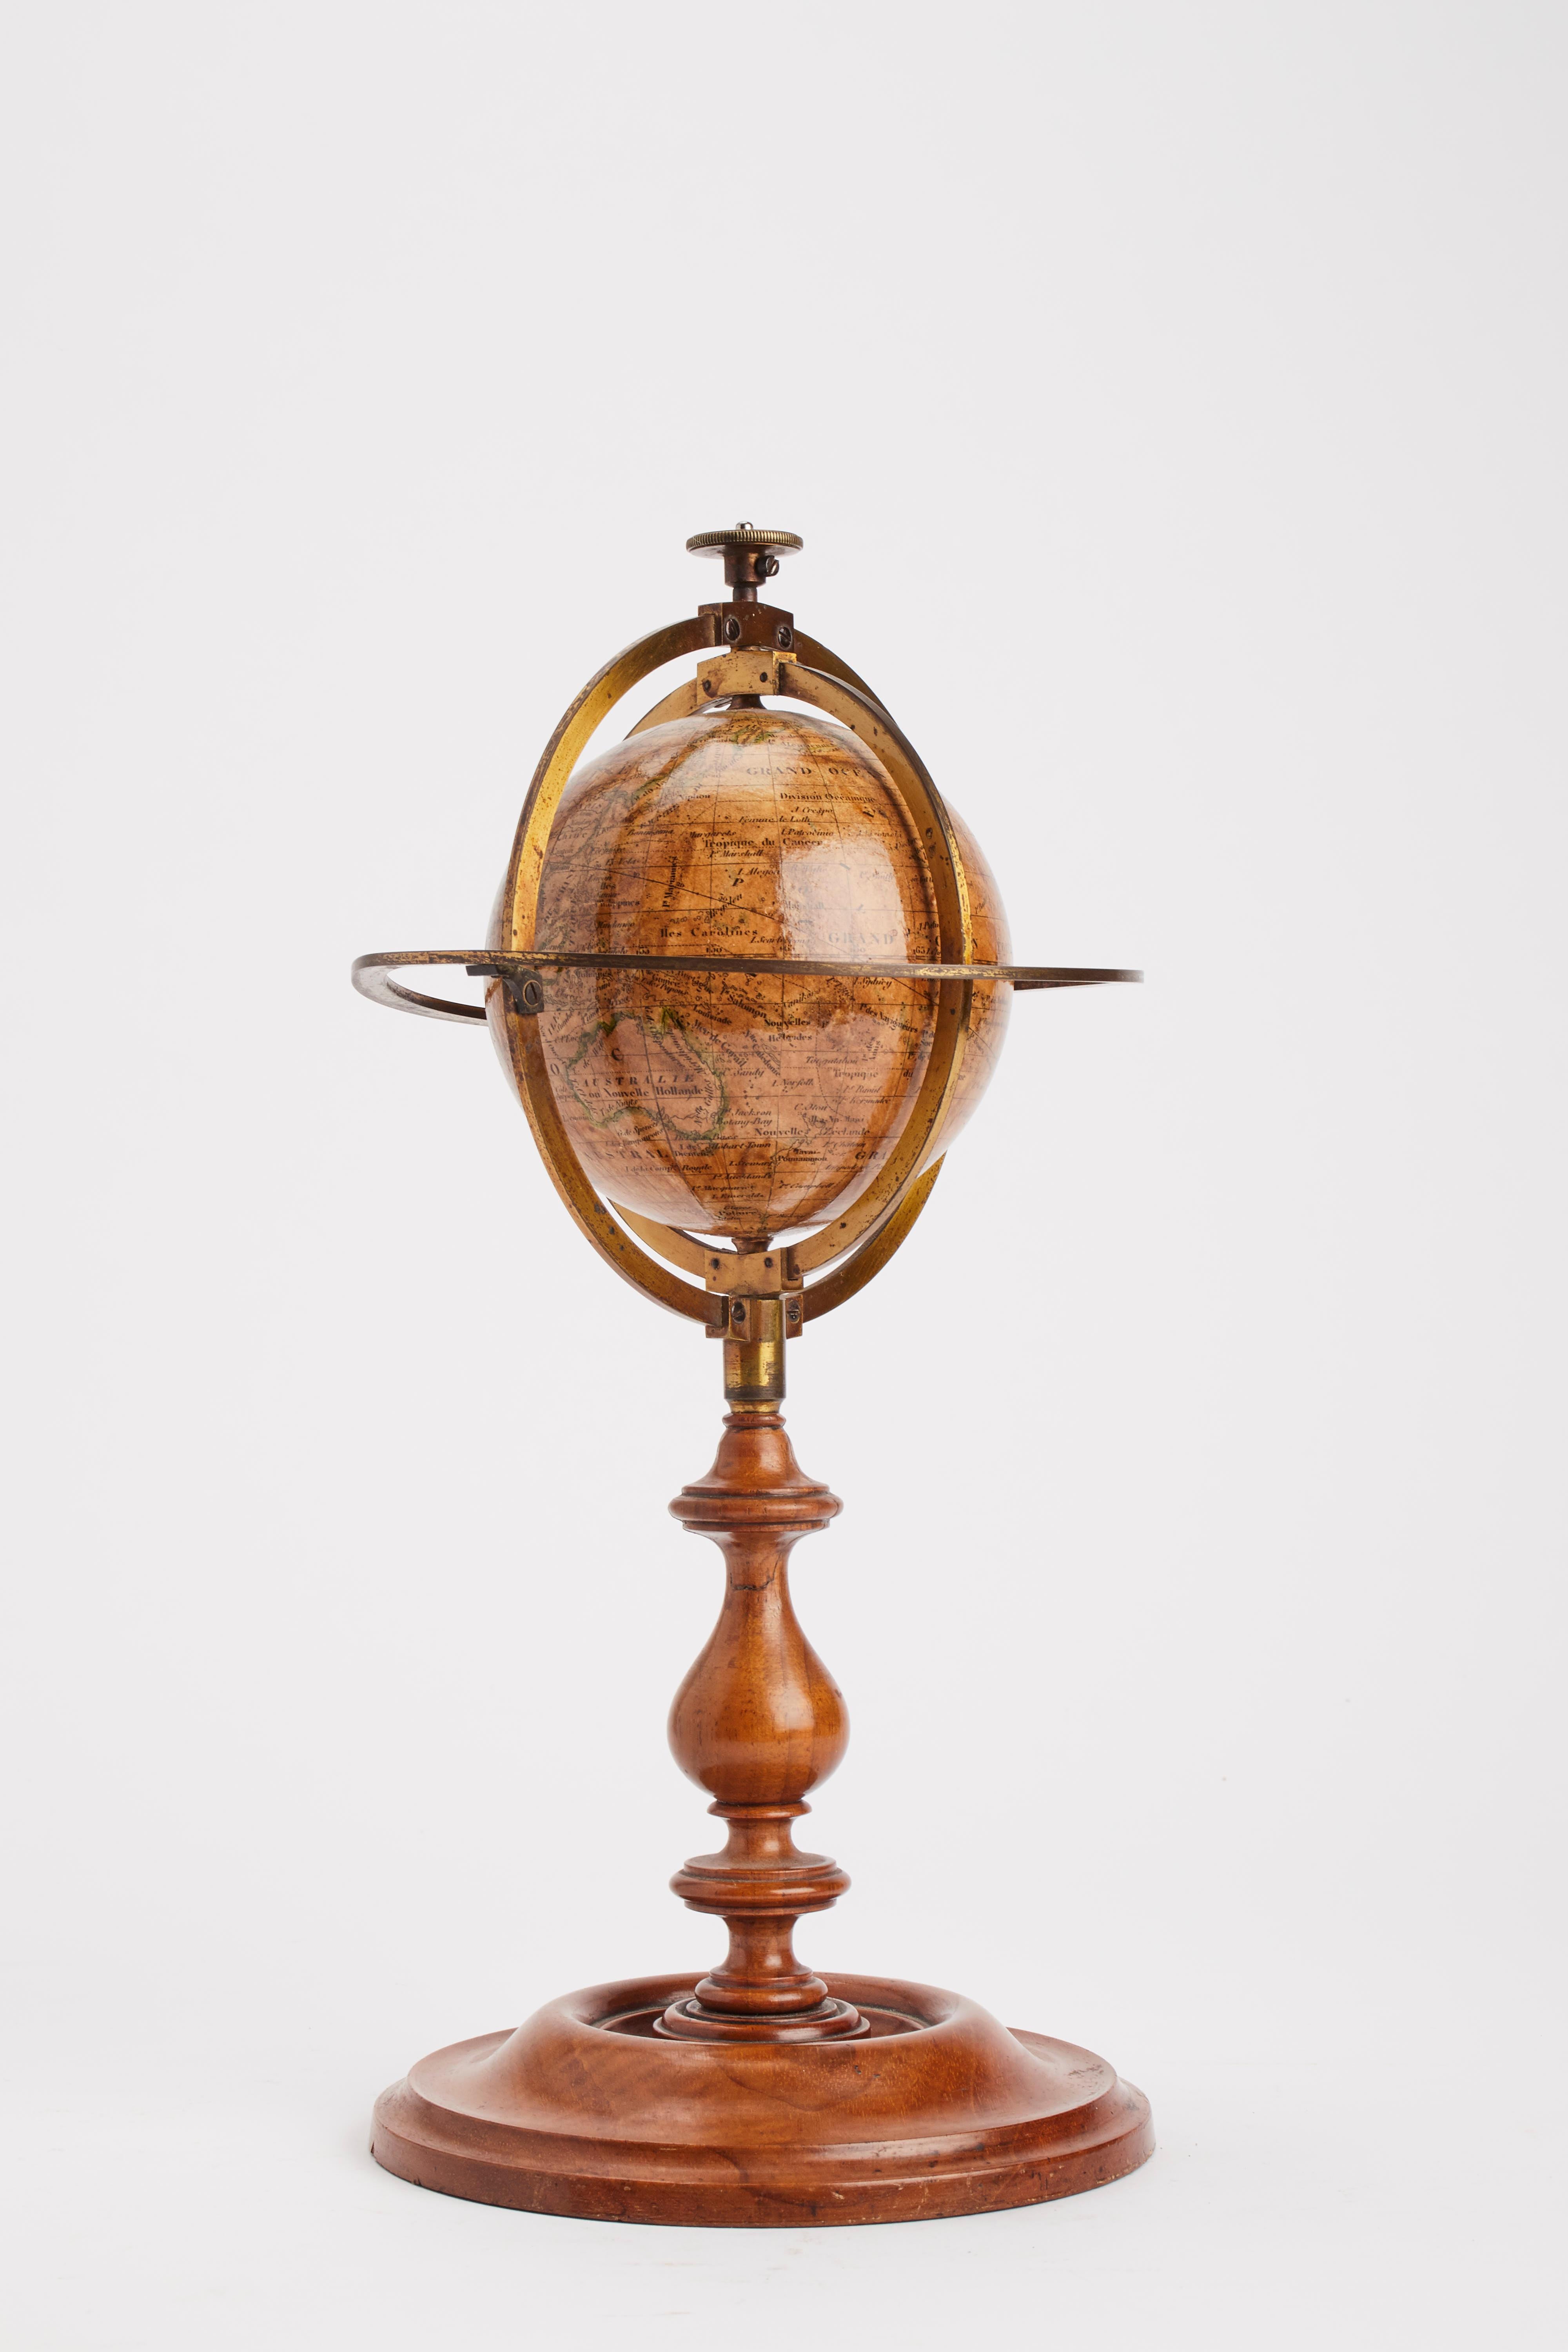 A small terrestrial globe, papier mâché, caged into a brass armillary structure, with tall foot and mahogany wooden base. Signed Delamarche, Paris, France, 1864.